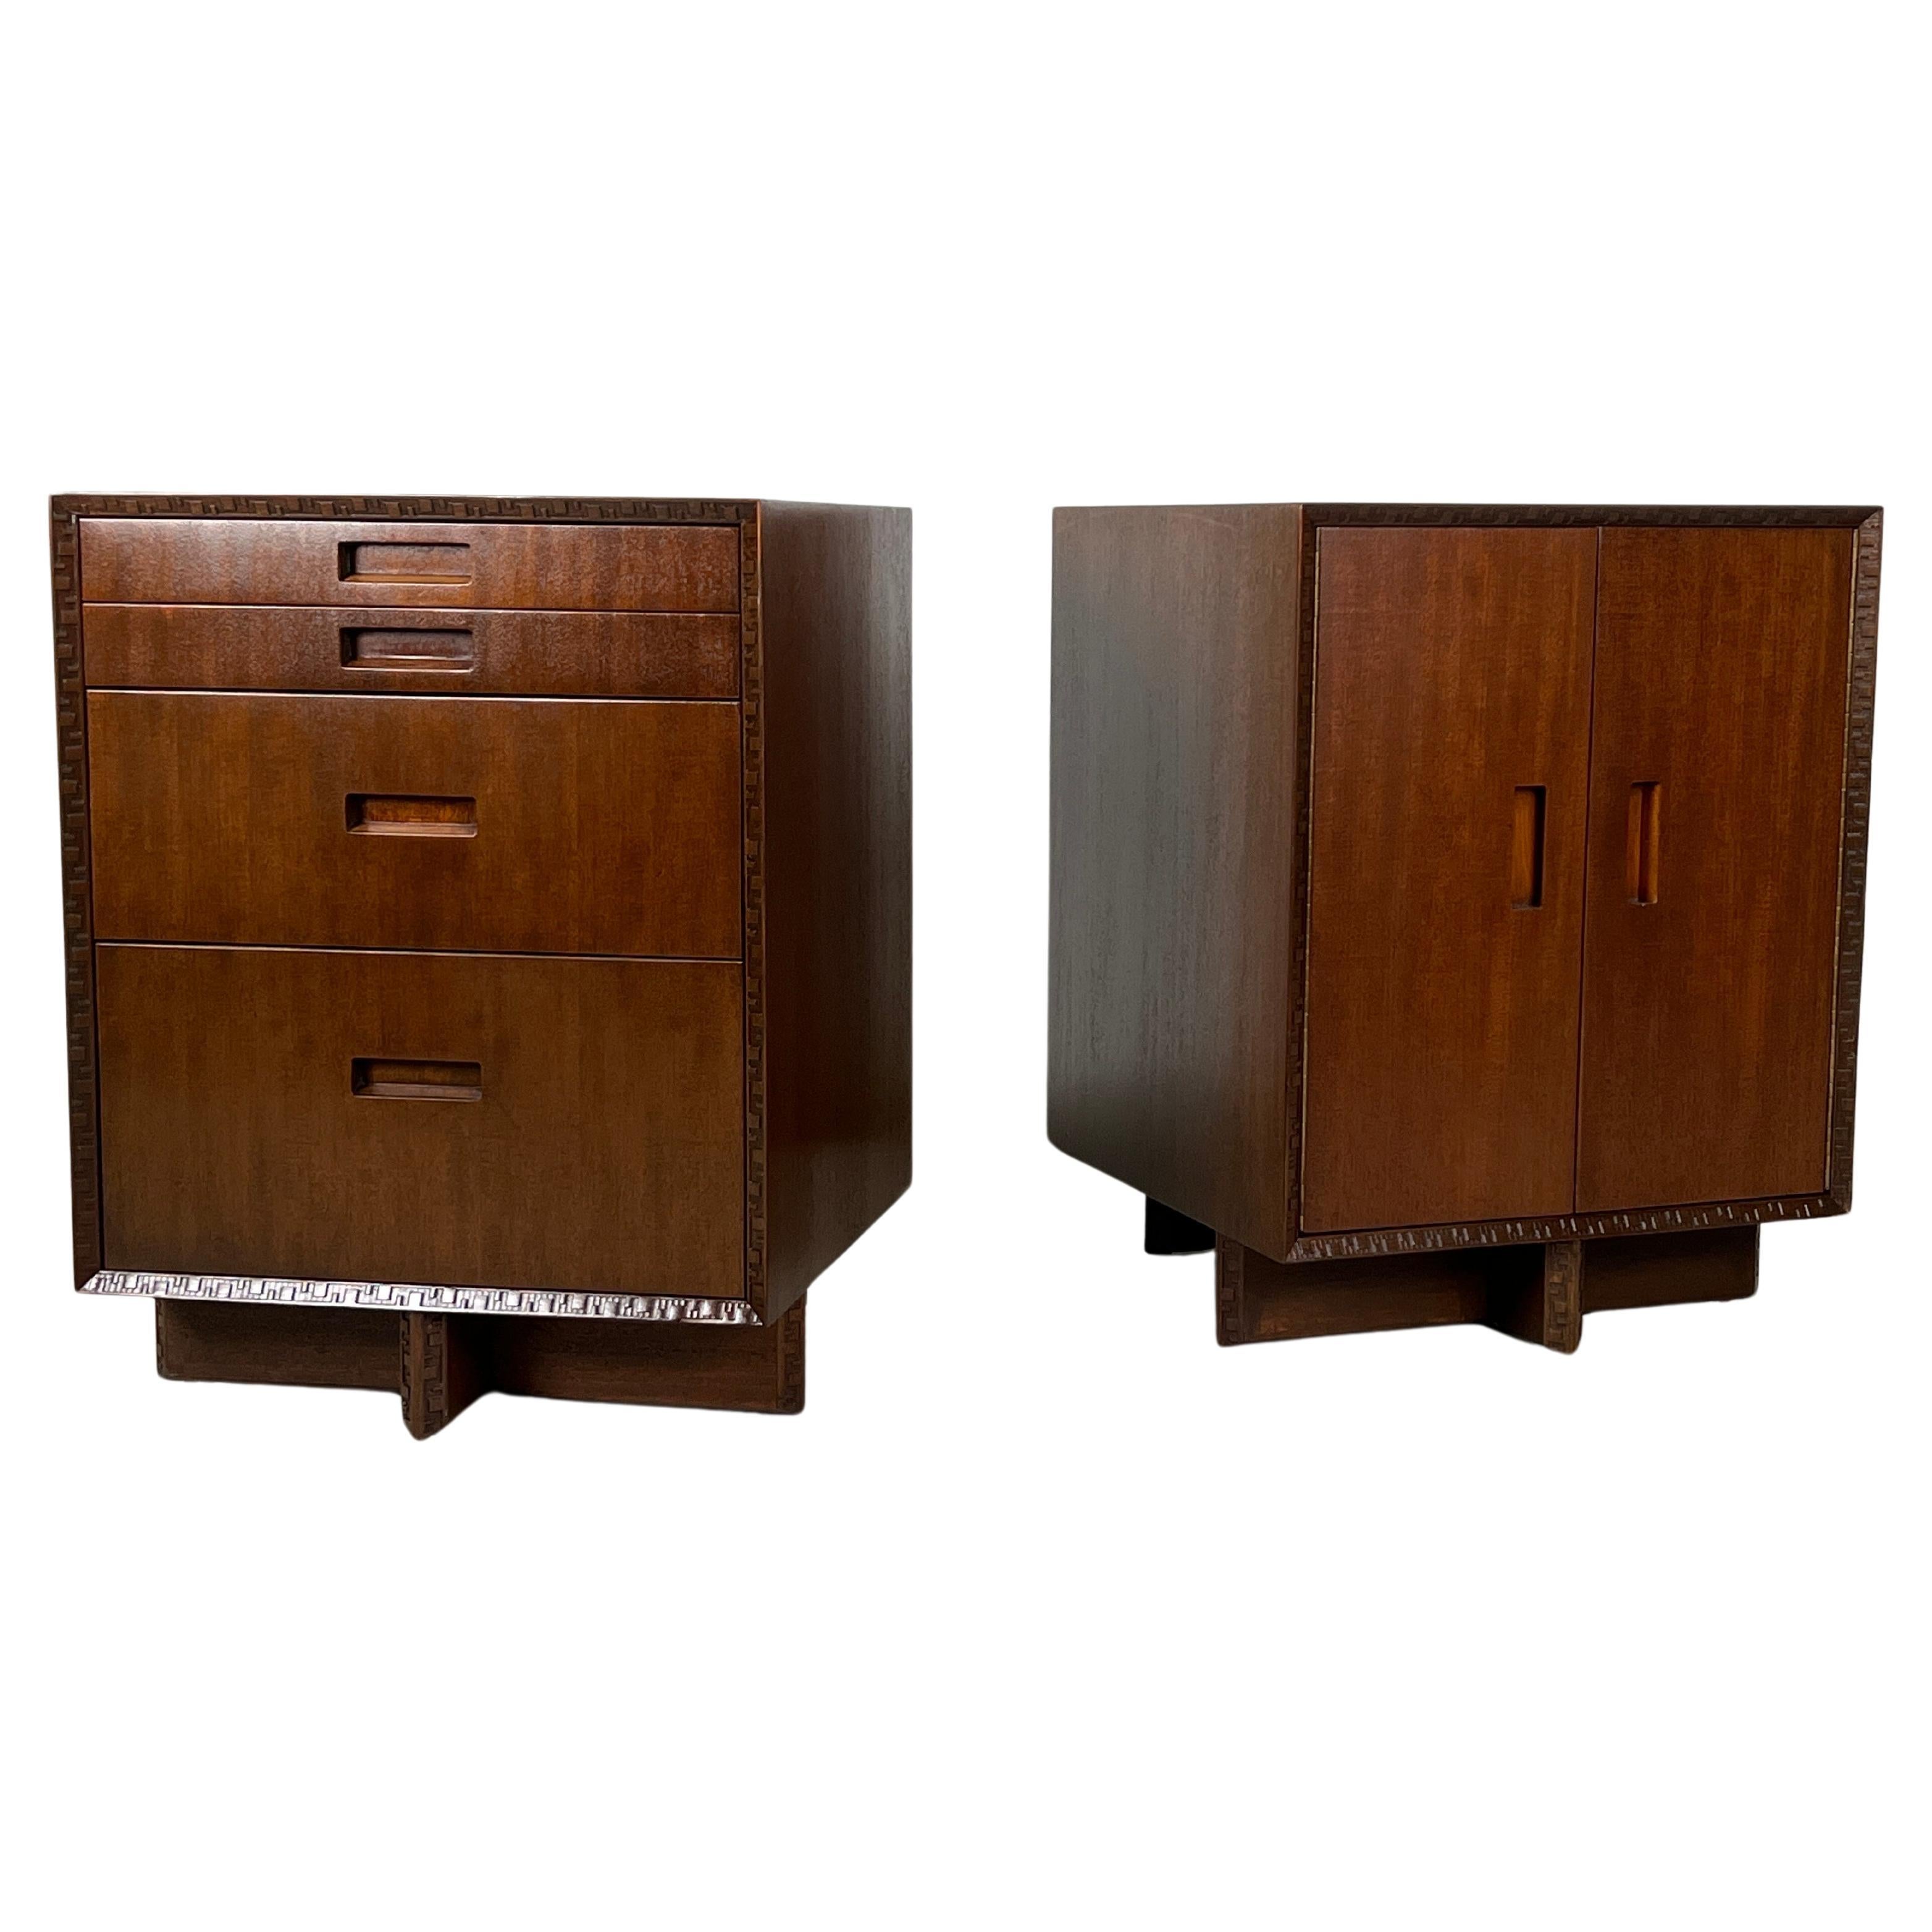 Pair of Nightstands / Small Cabinets by Frank Lloyd Wright for Henredon For Sale